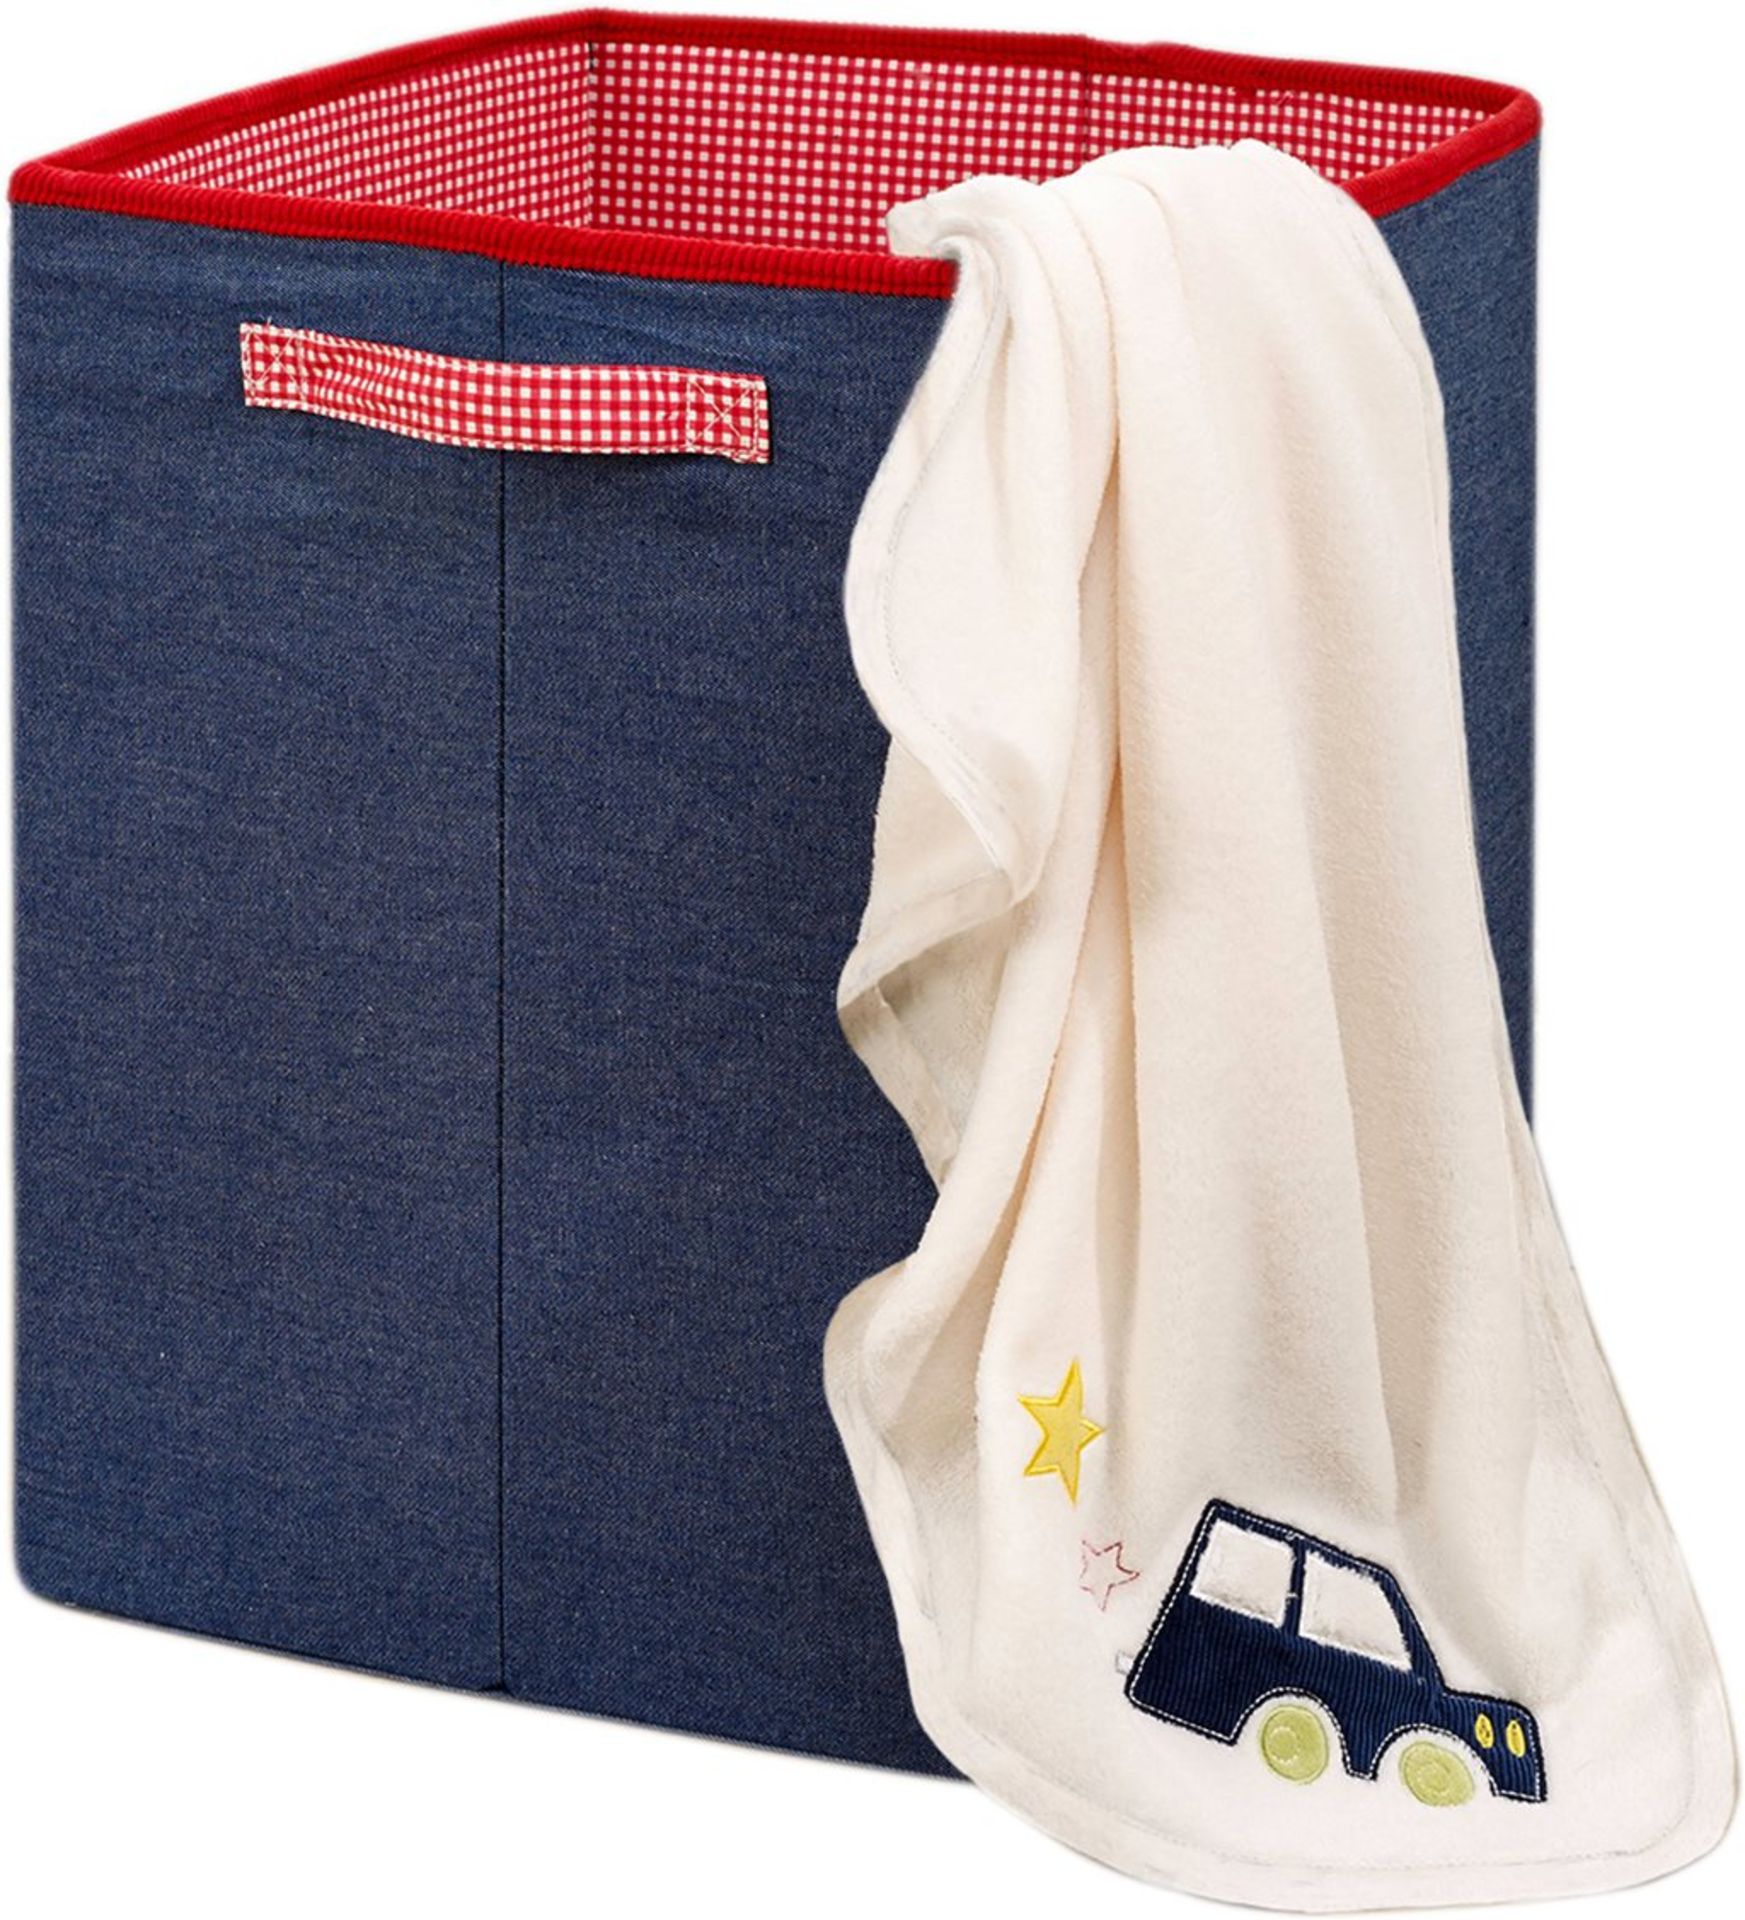 50 sets Fetch the Engine Boys Storage Hamper/Toy Box/Laundry Basket (Denim blue with red an - Image 2 of 2